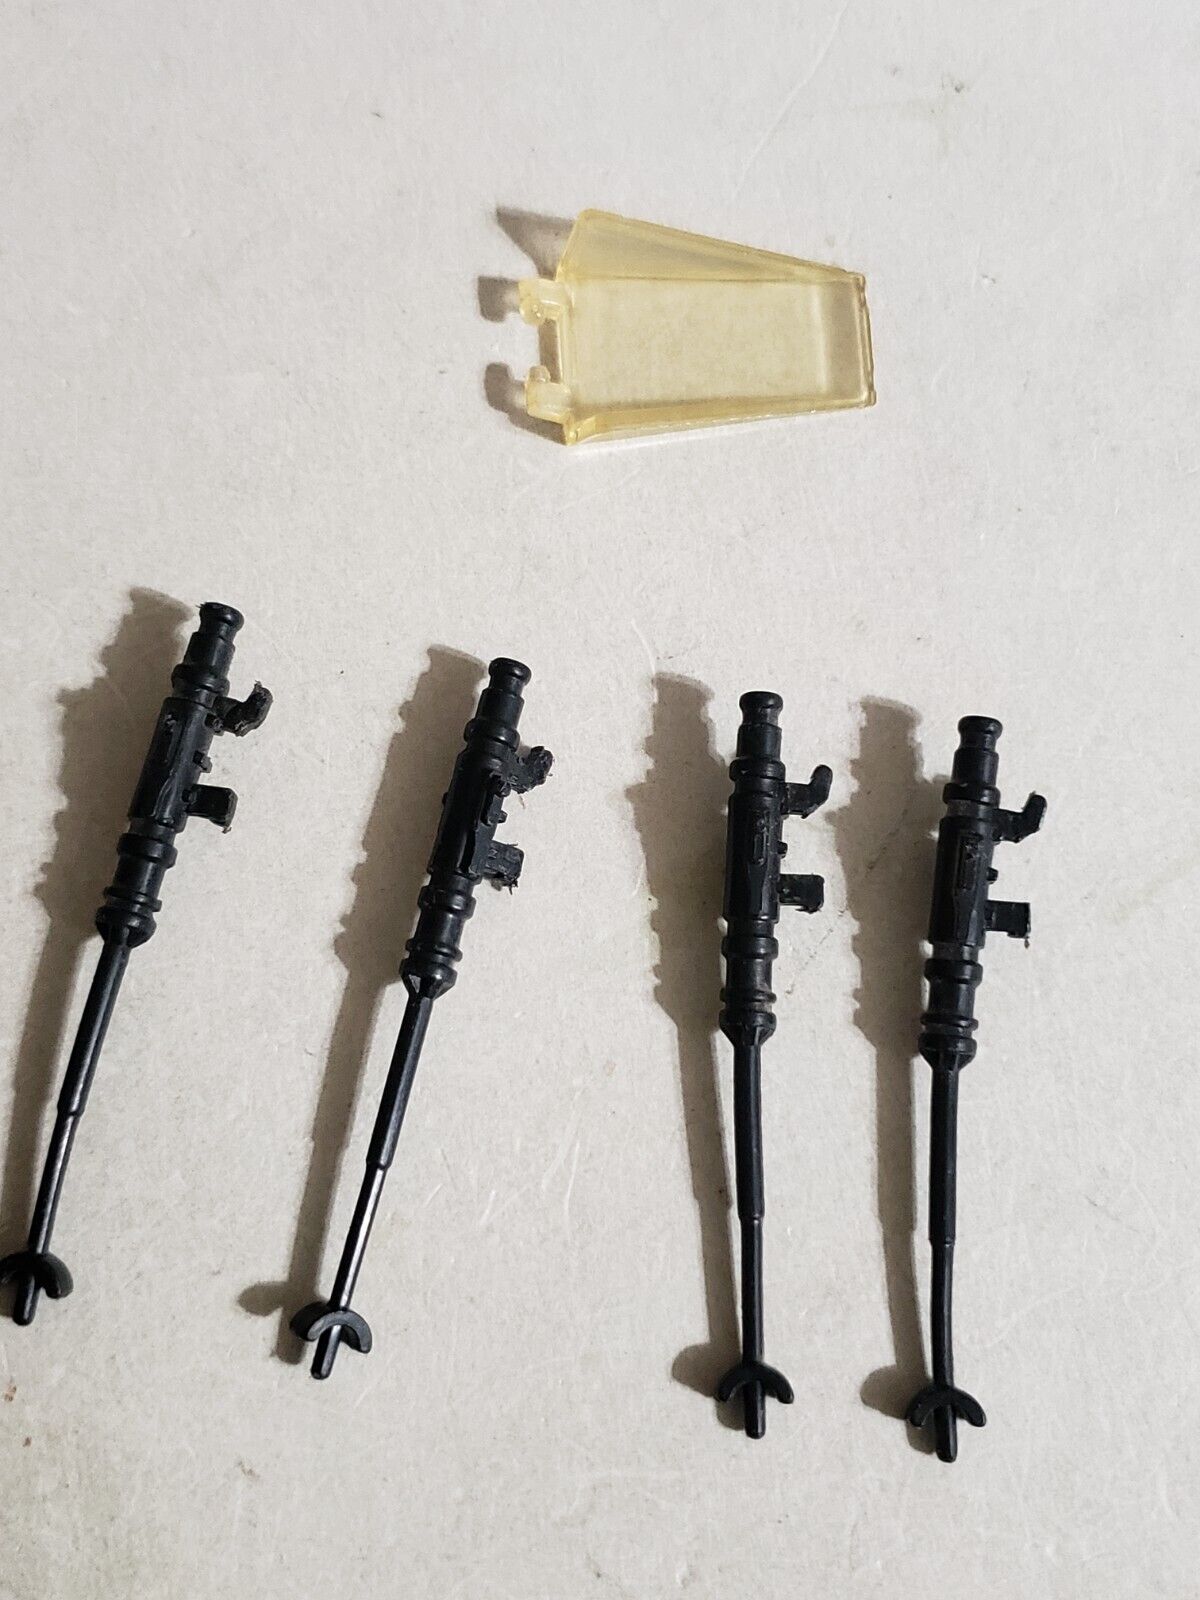 1982 Kenner Break apart micro x-wing cannons and canopy vintage star wars